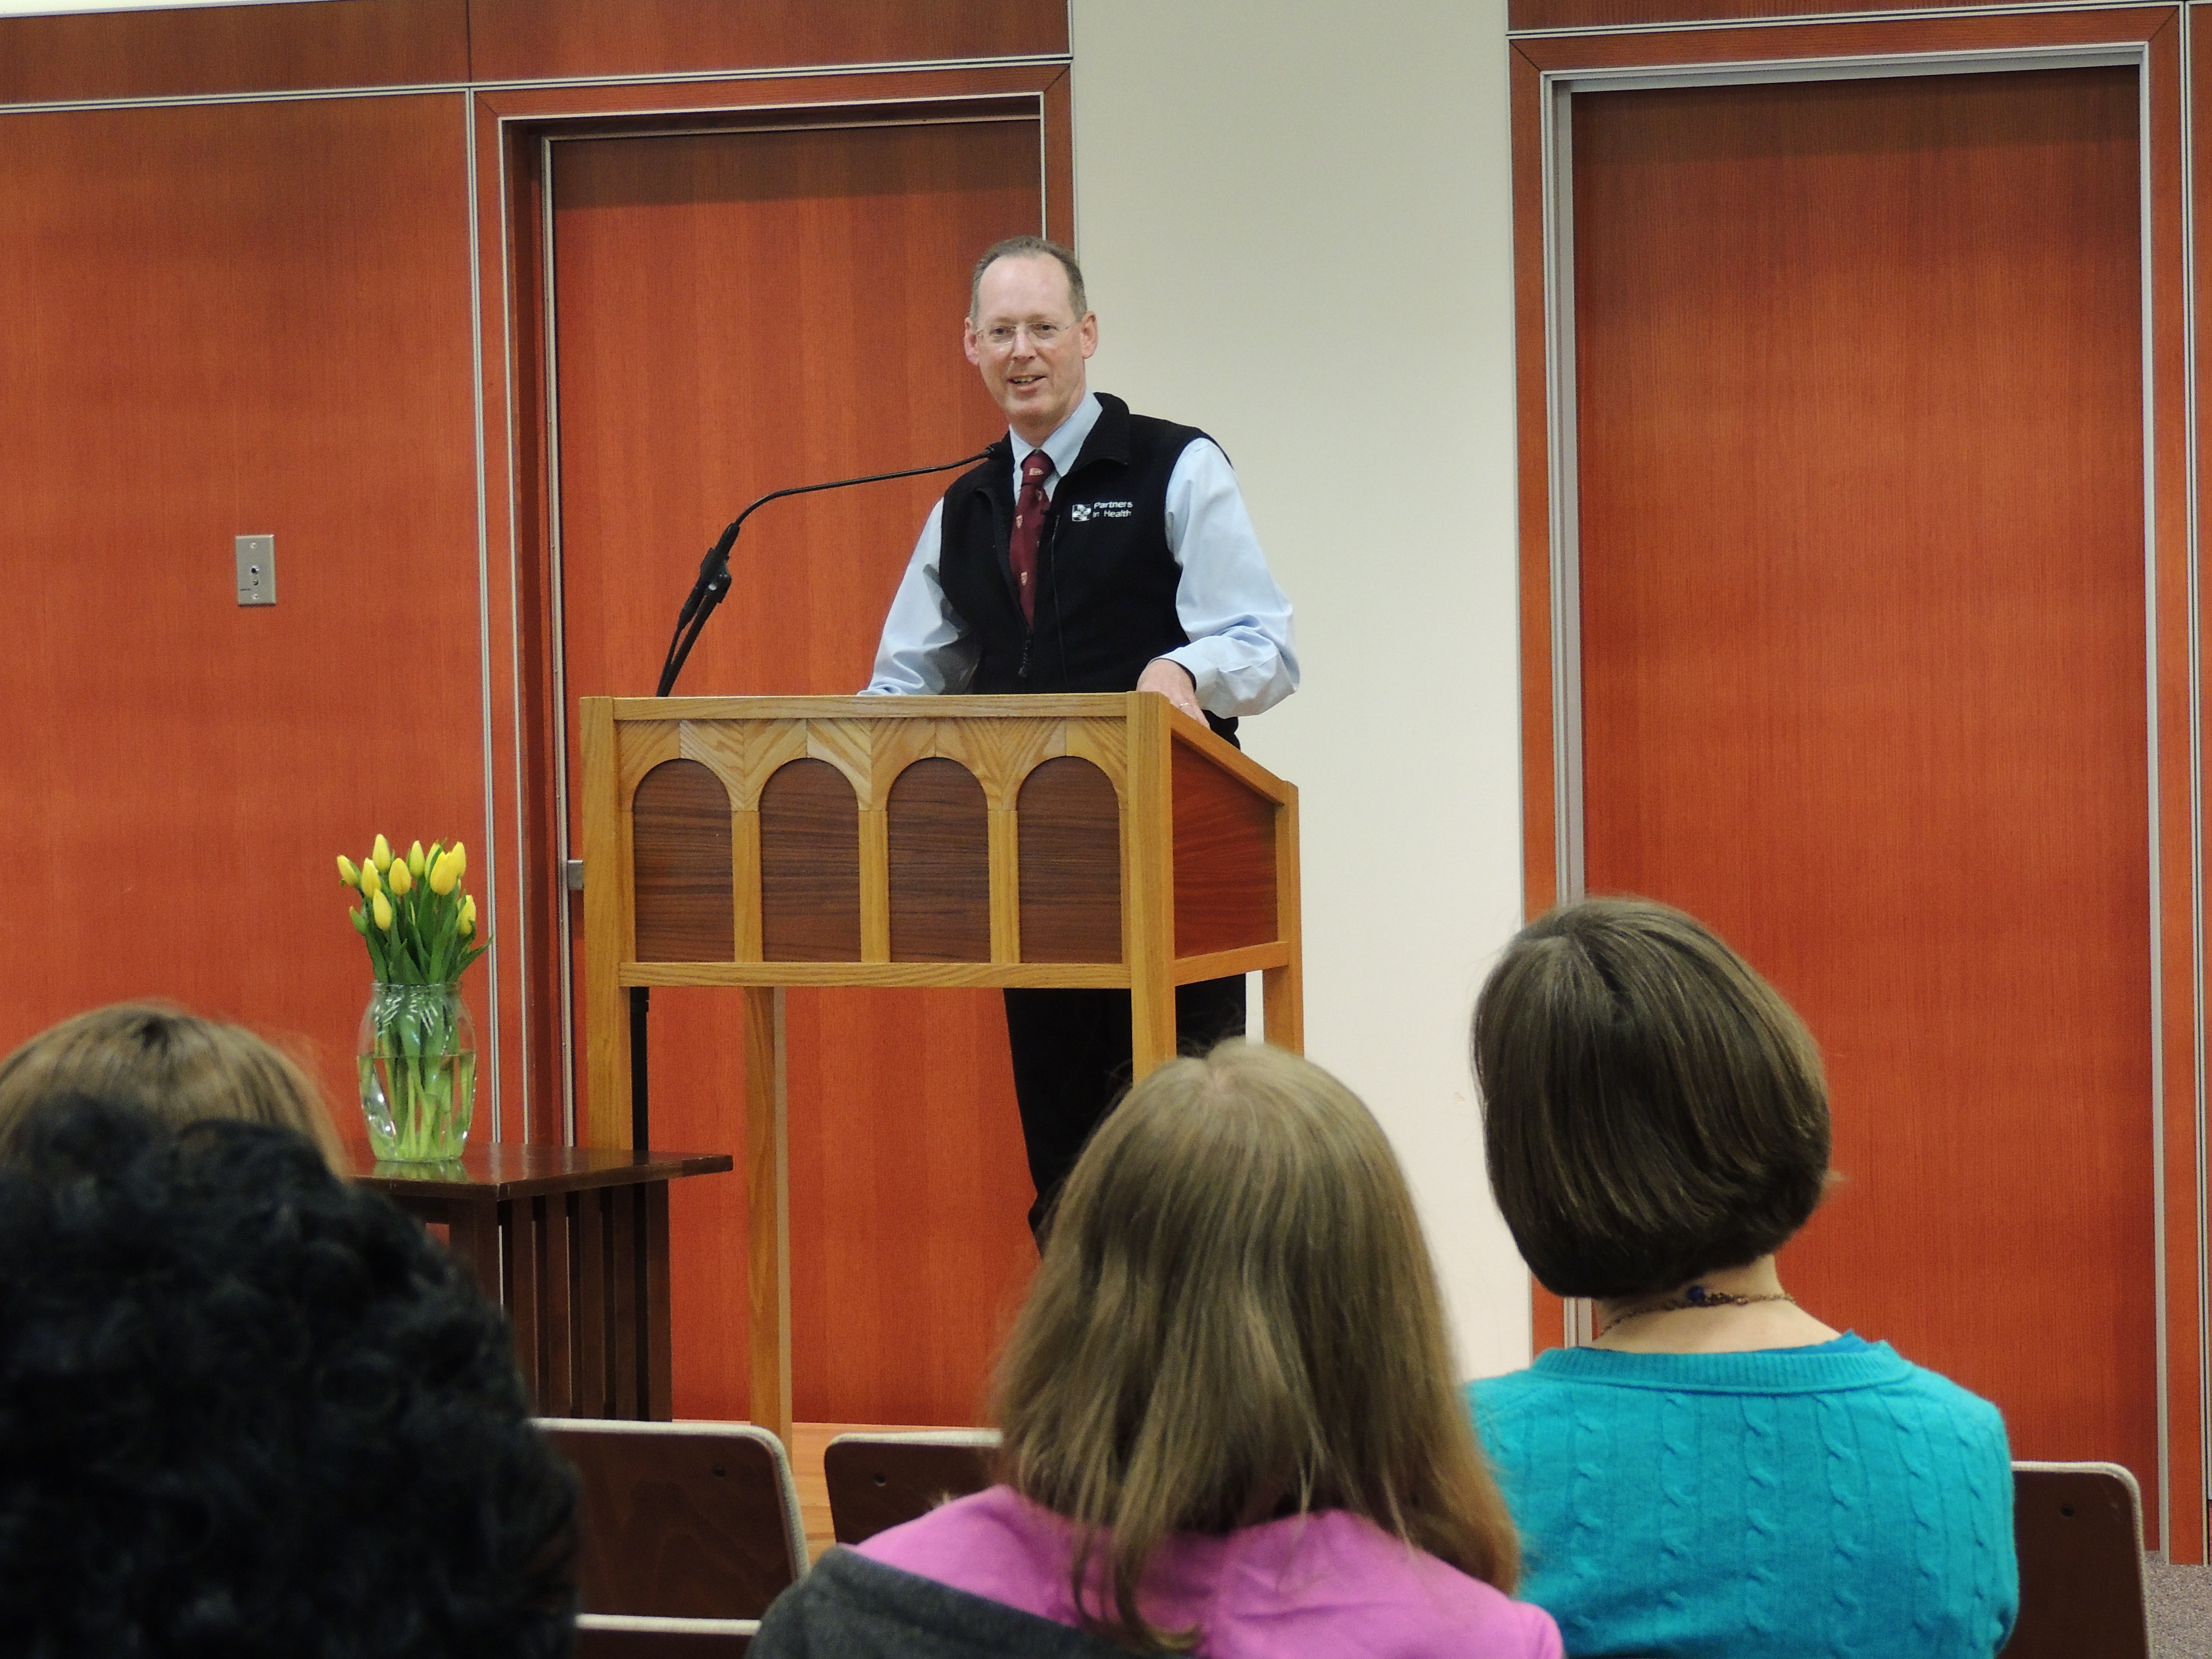 Blessed Are the Peacemakers award 2015 recipient Dr. Paul Farmer, addresses students and faculty at Catholic Theological Union in April 2015. (CTU photo)